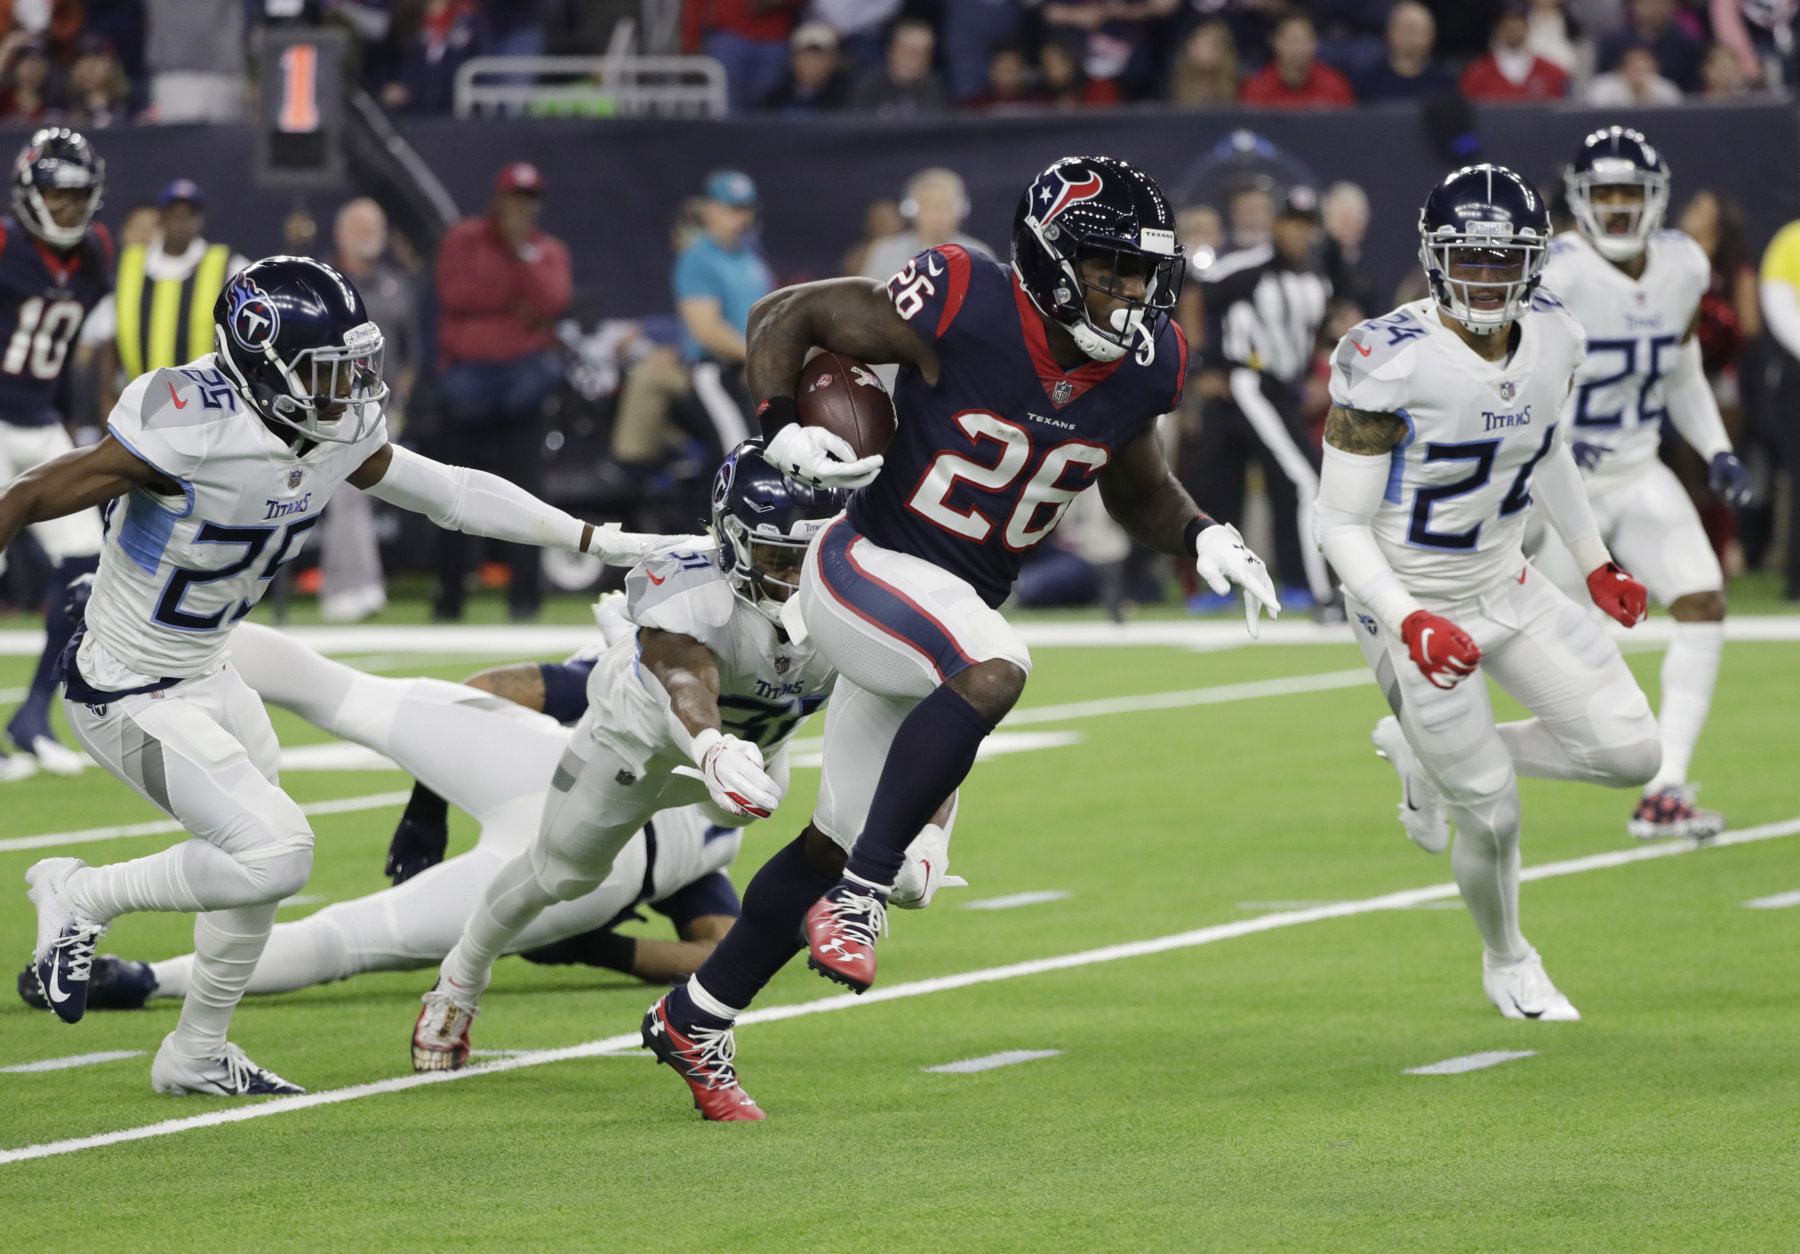 Houston Texans running back Lamar Miller (26) breaks away from Tennessee Titans defenders for a 97-yard touchdown run during the first half of an NFL football game, Monday, Nov. 26, 2018, in Houston. (AP Photo/David J. Phillip)